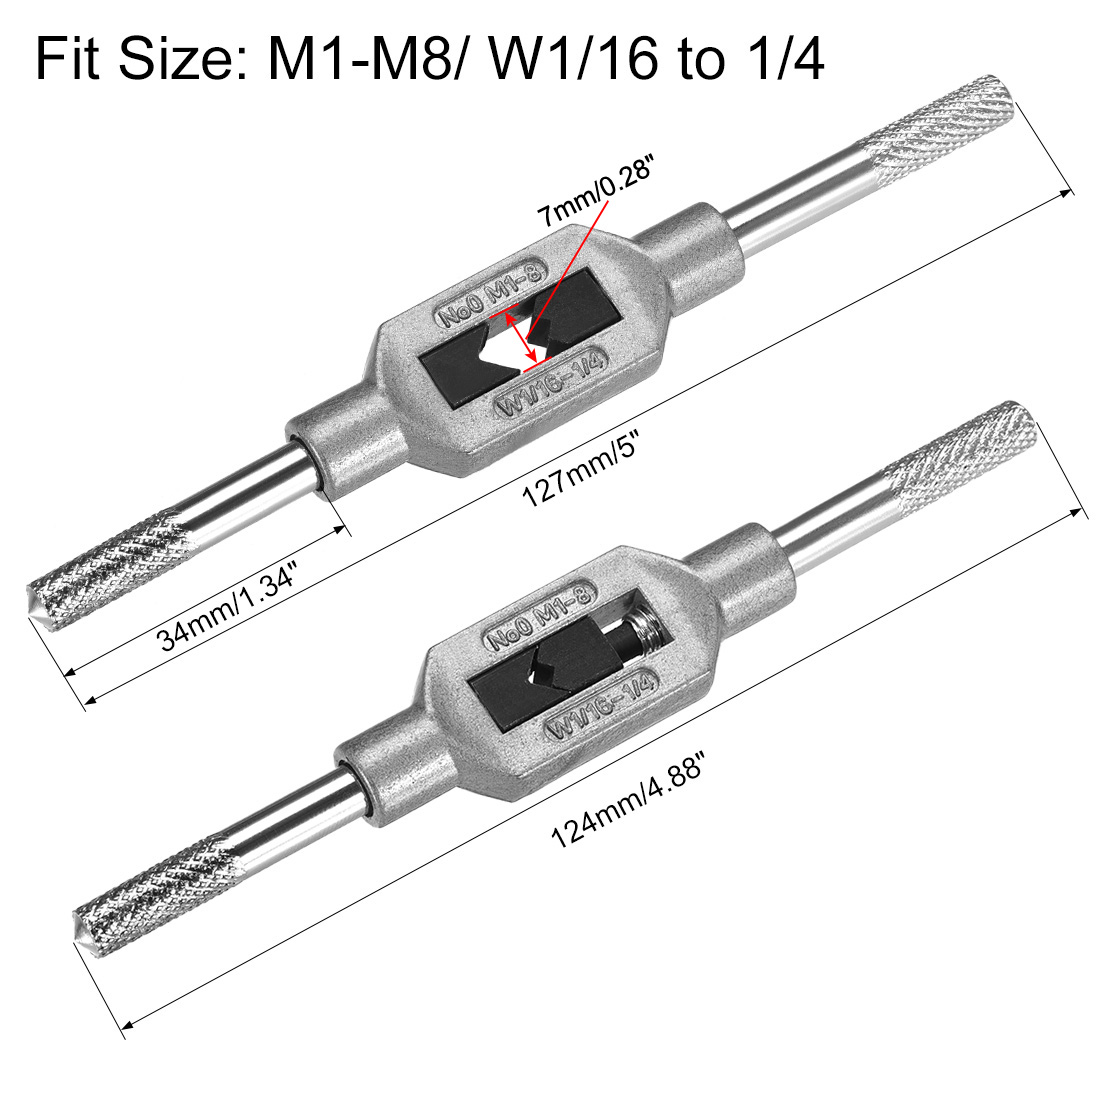 Uxcell Metric M1-M8 1/16" - 1/4" (UNC/UNF) Adjustable Tap Wrench Handle Nickel Plated 2 Pack - image 3 of 6